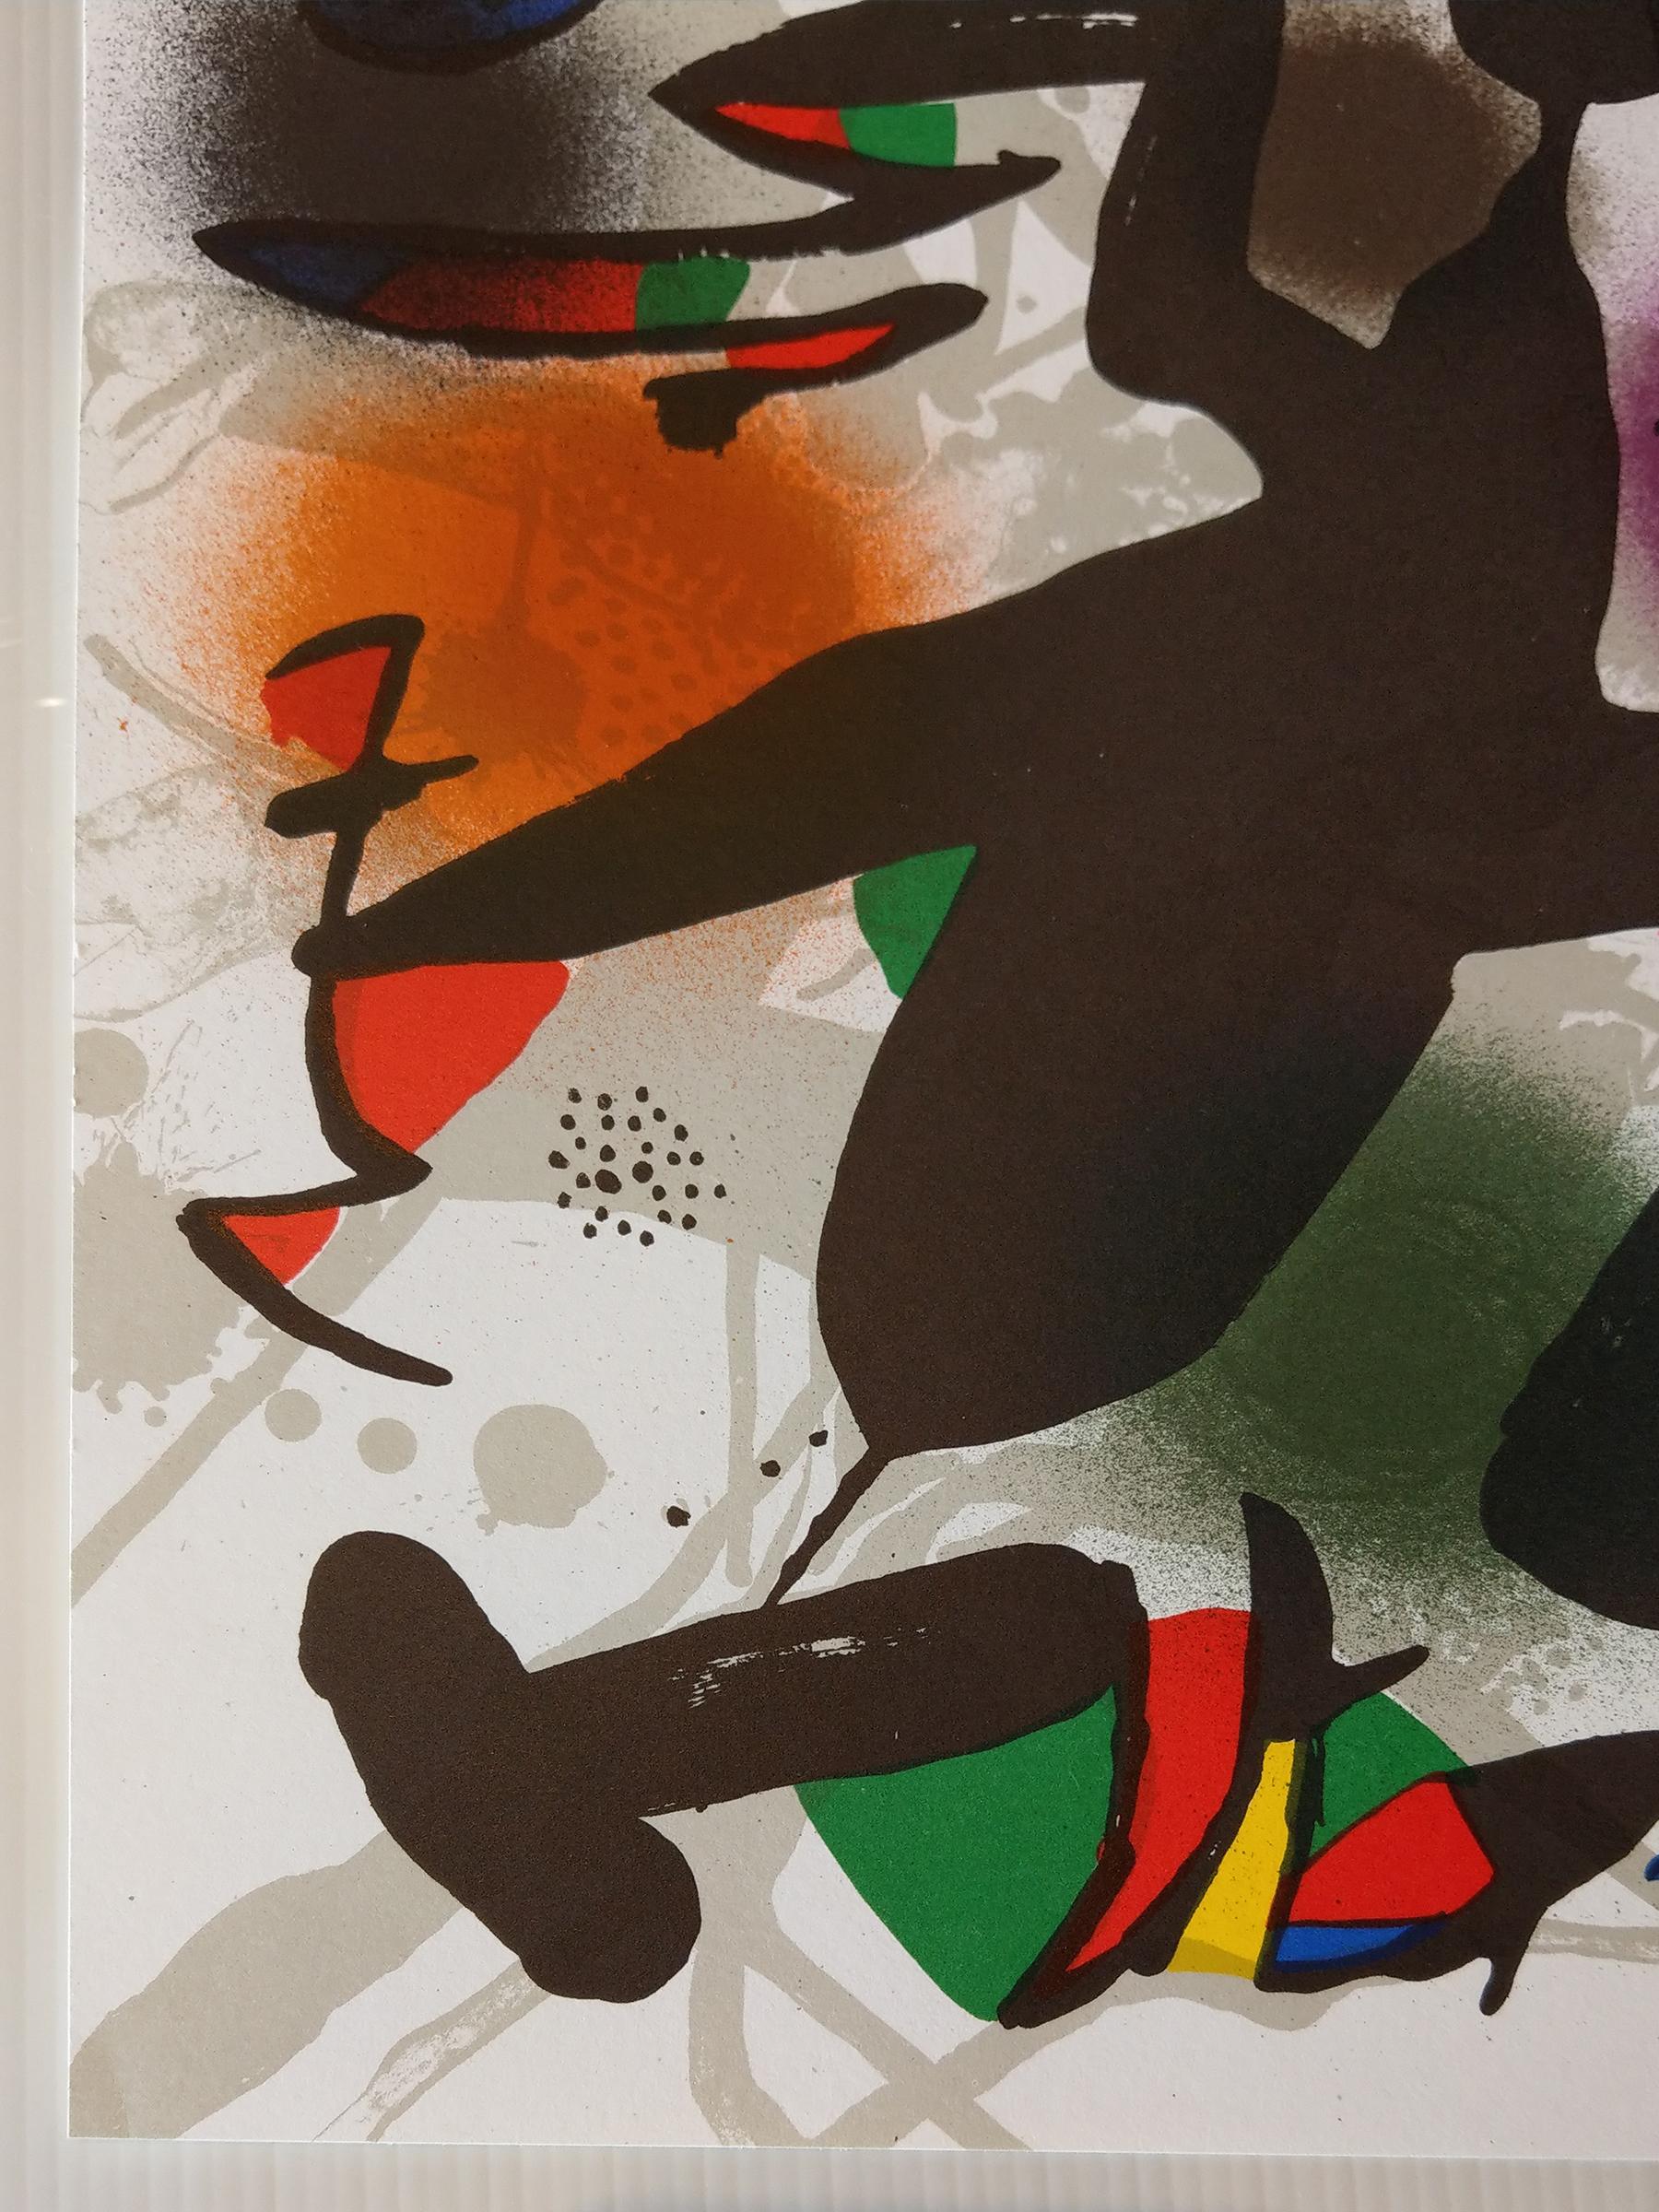 This original color lithograph by Joan Miró was printed 1969 and measures 12.63